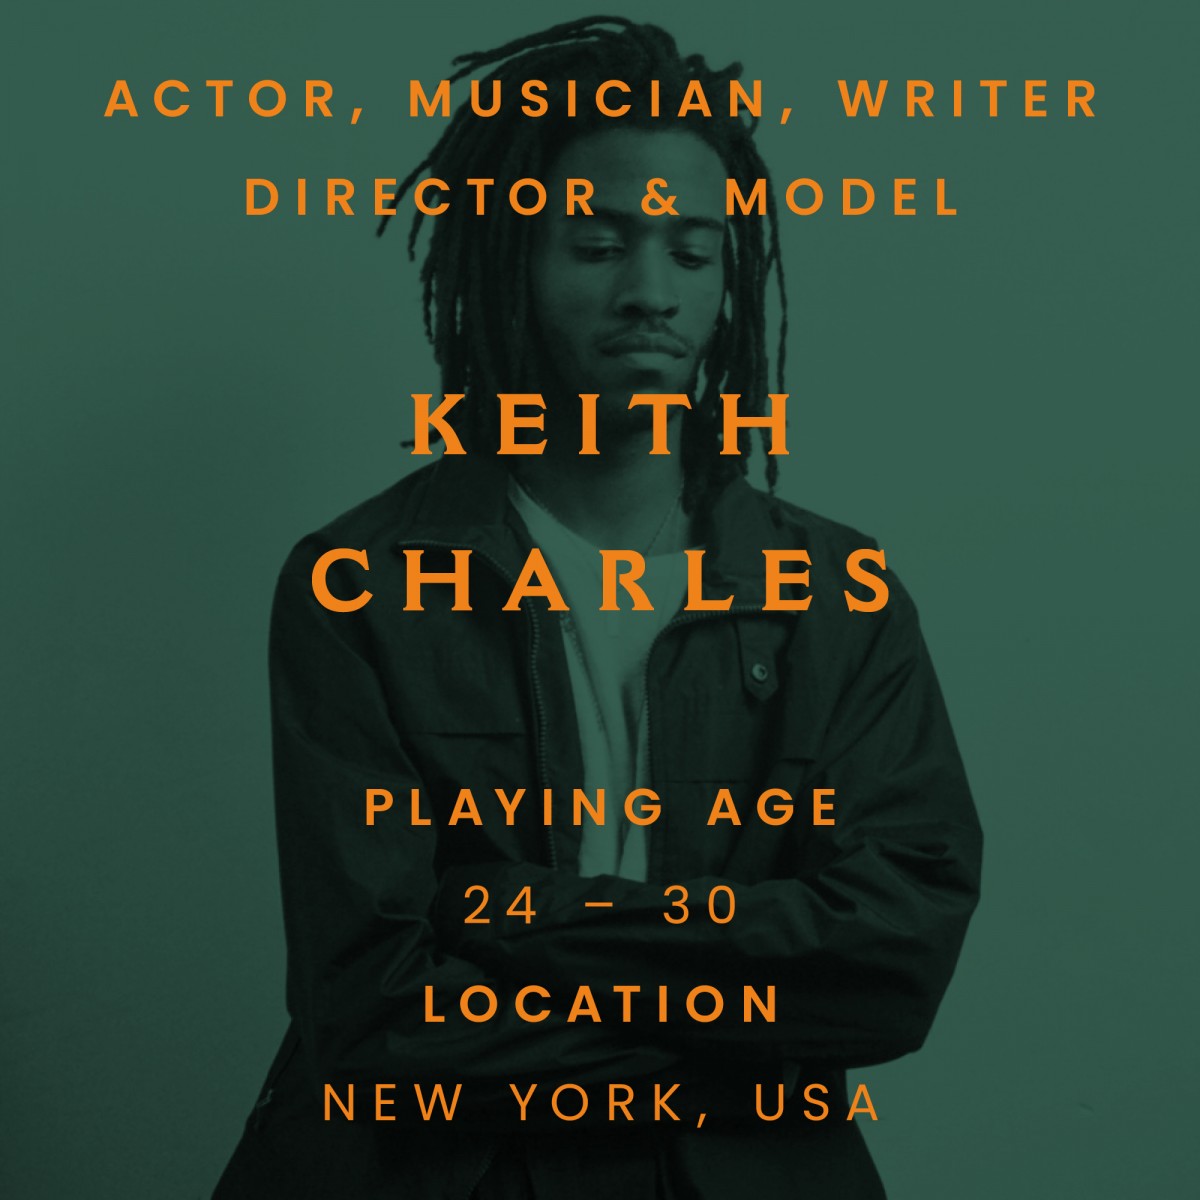 Keith Charles, actor, musician, new york